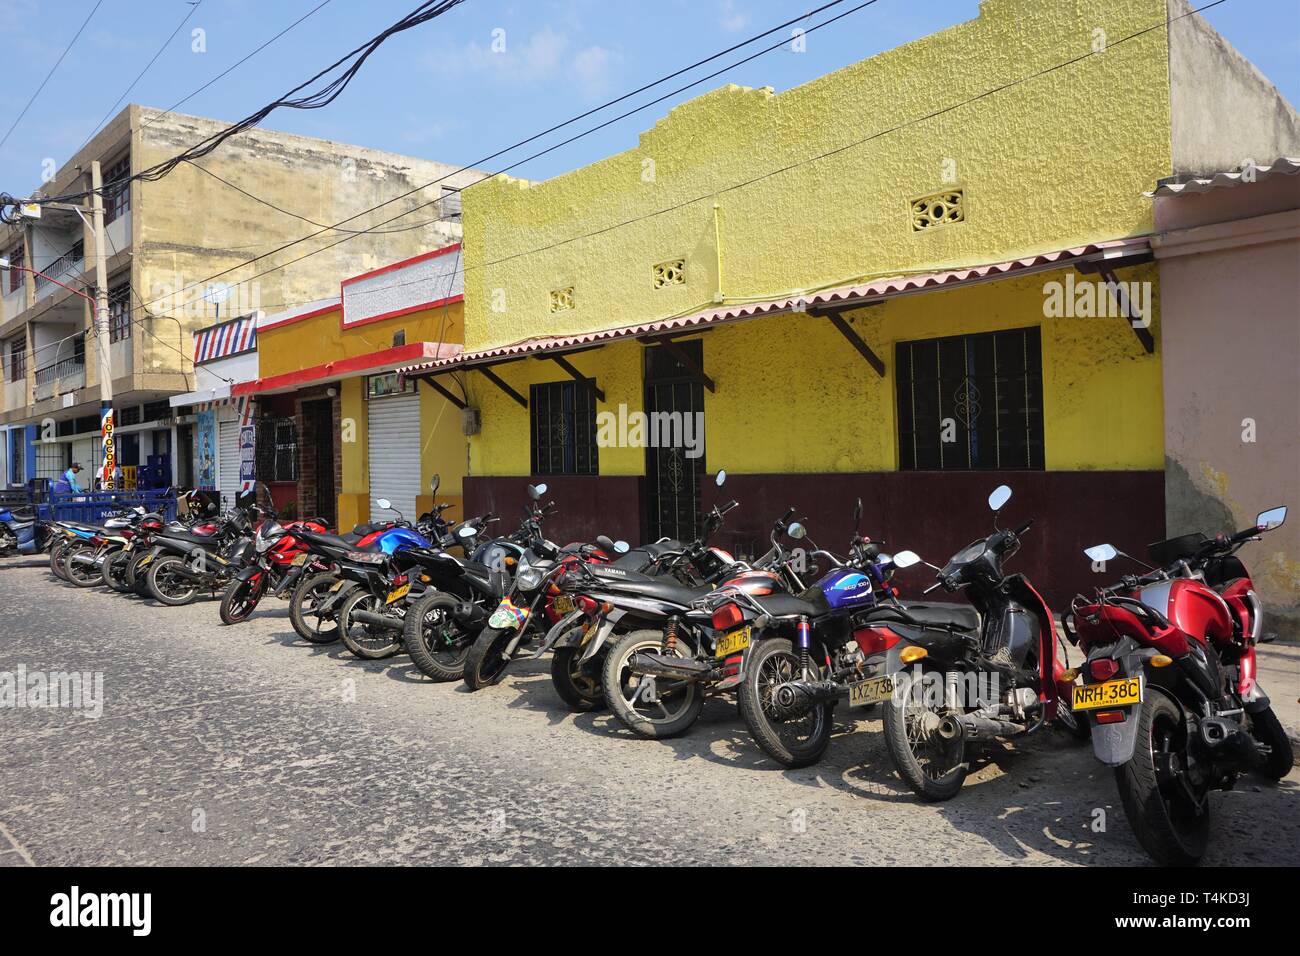 Diminishing View of a Row of Motorcycles parked in a sunlit Street Stock Photo